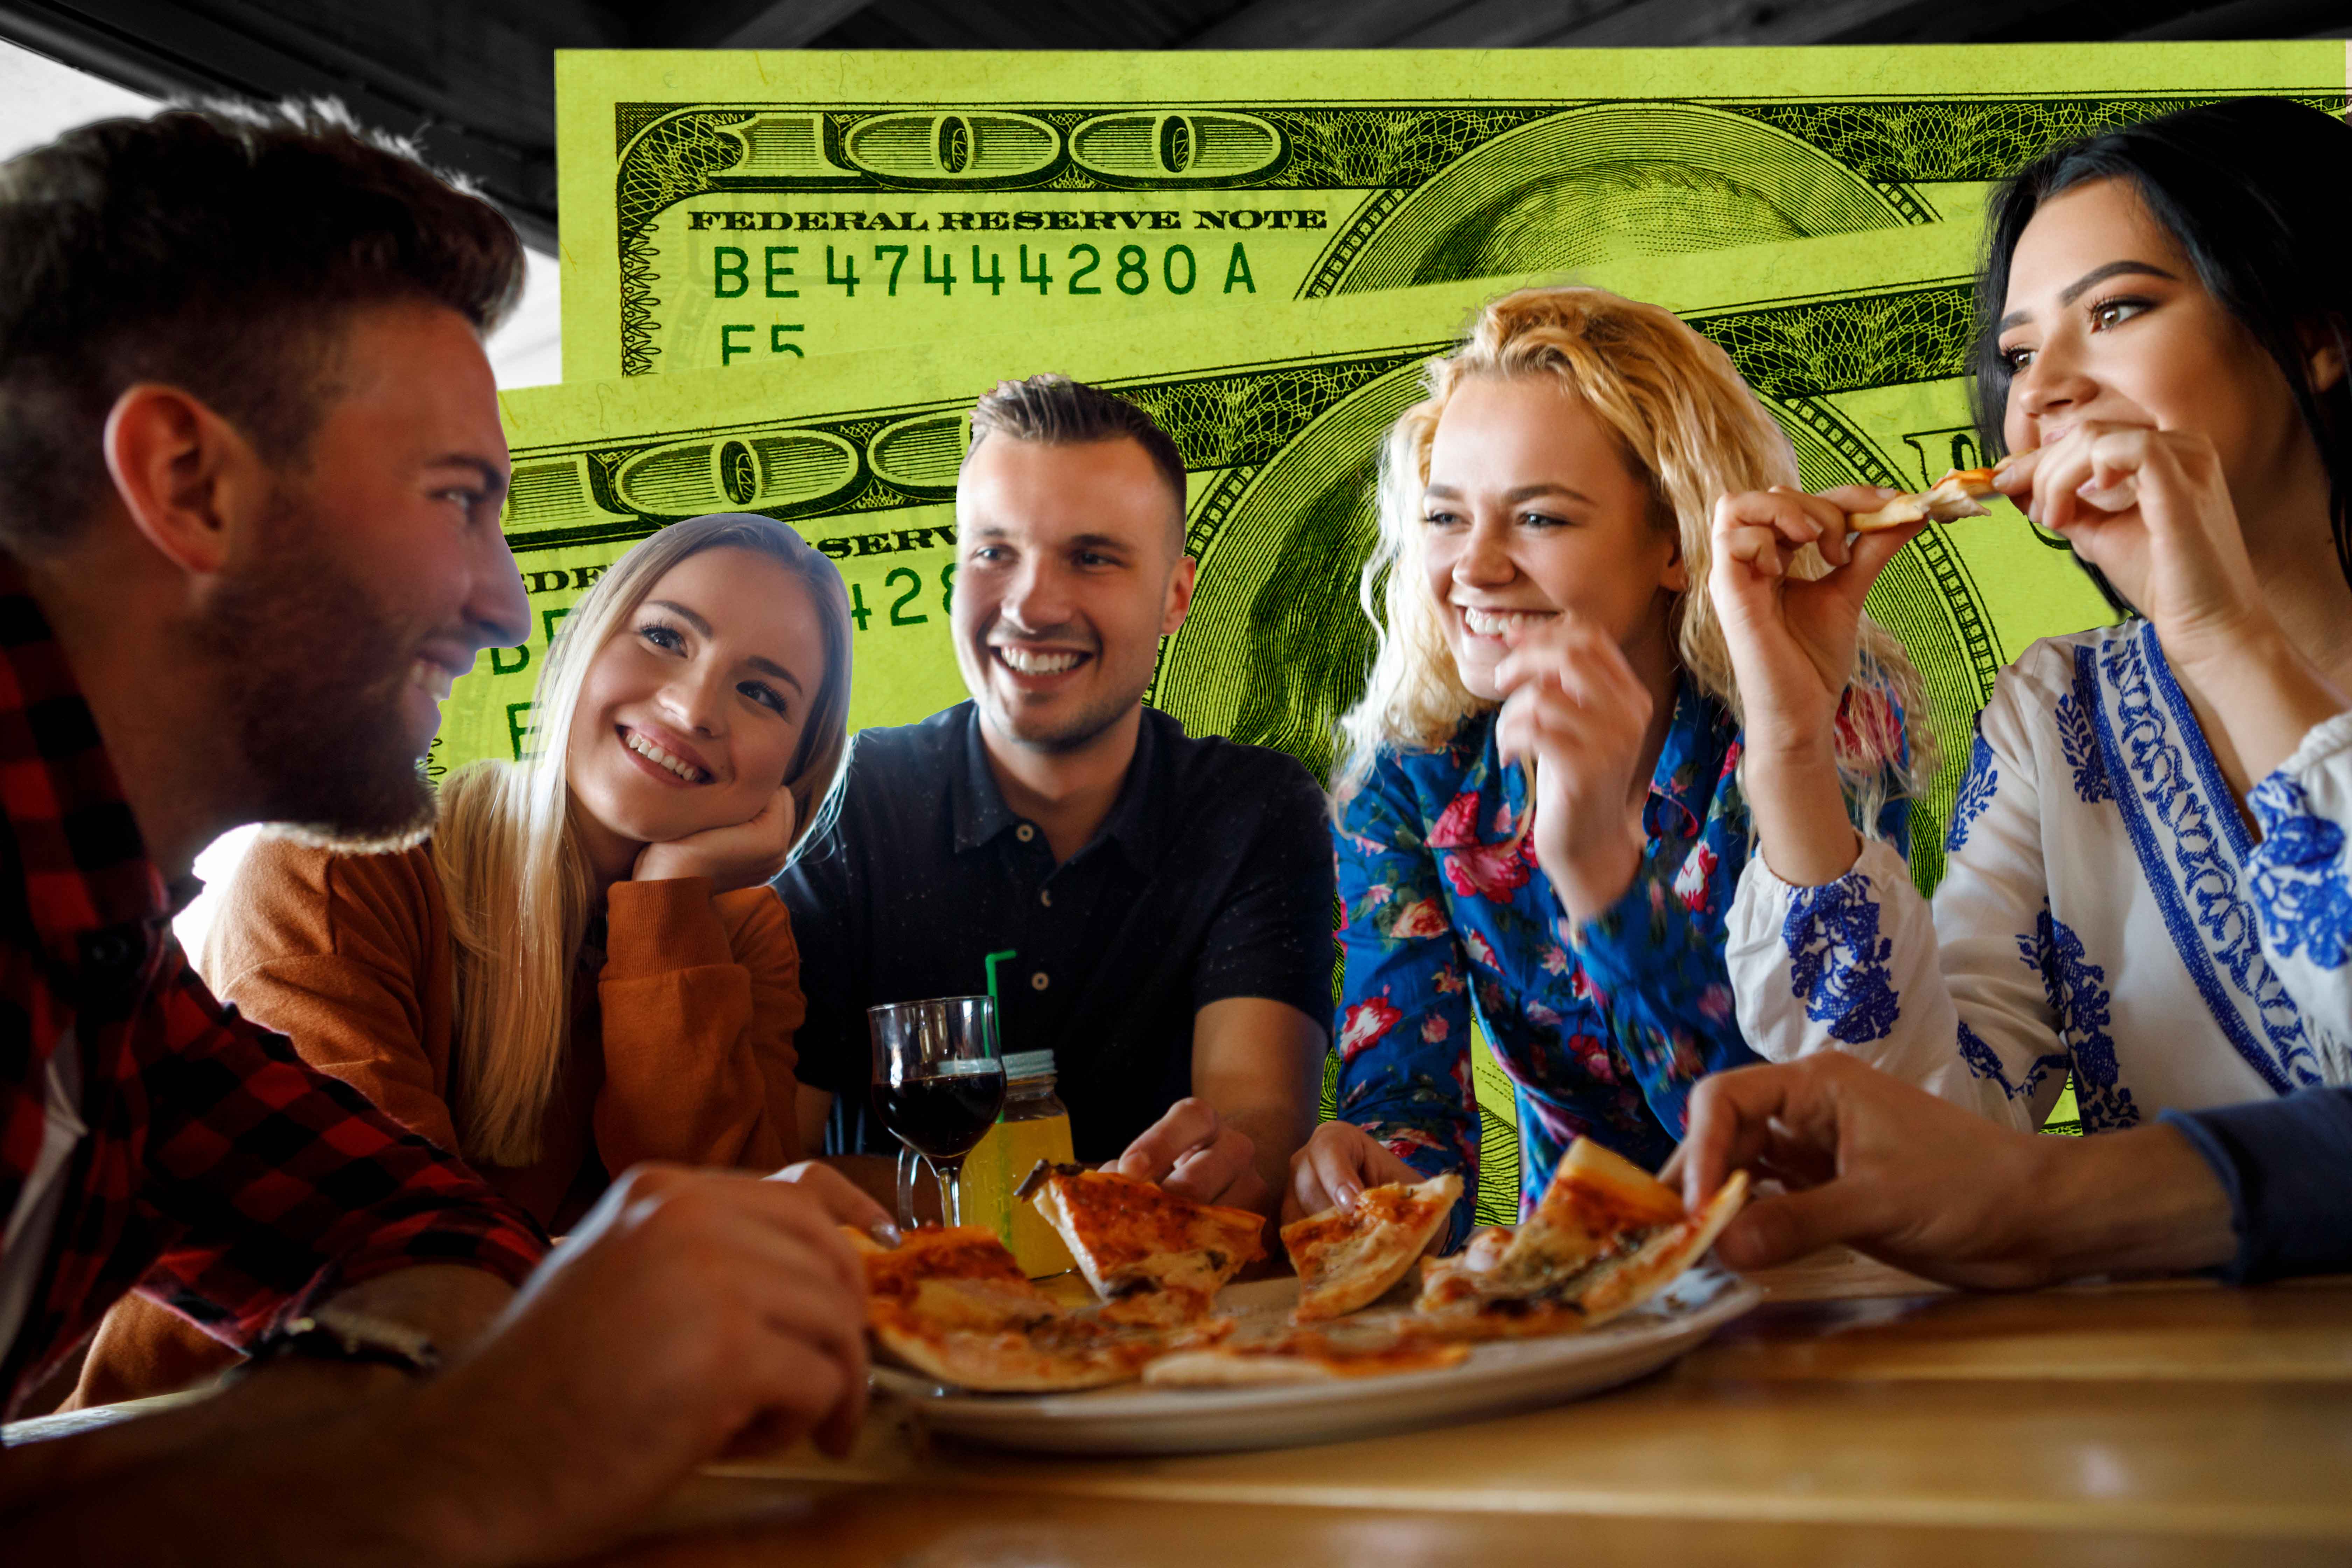 Study Finds the Key to Getting Richer Is Making Wealthy Friends... at Applebee's?